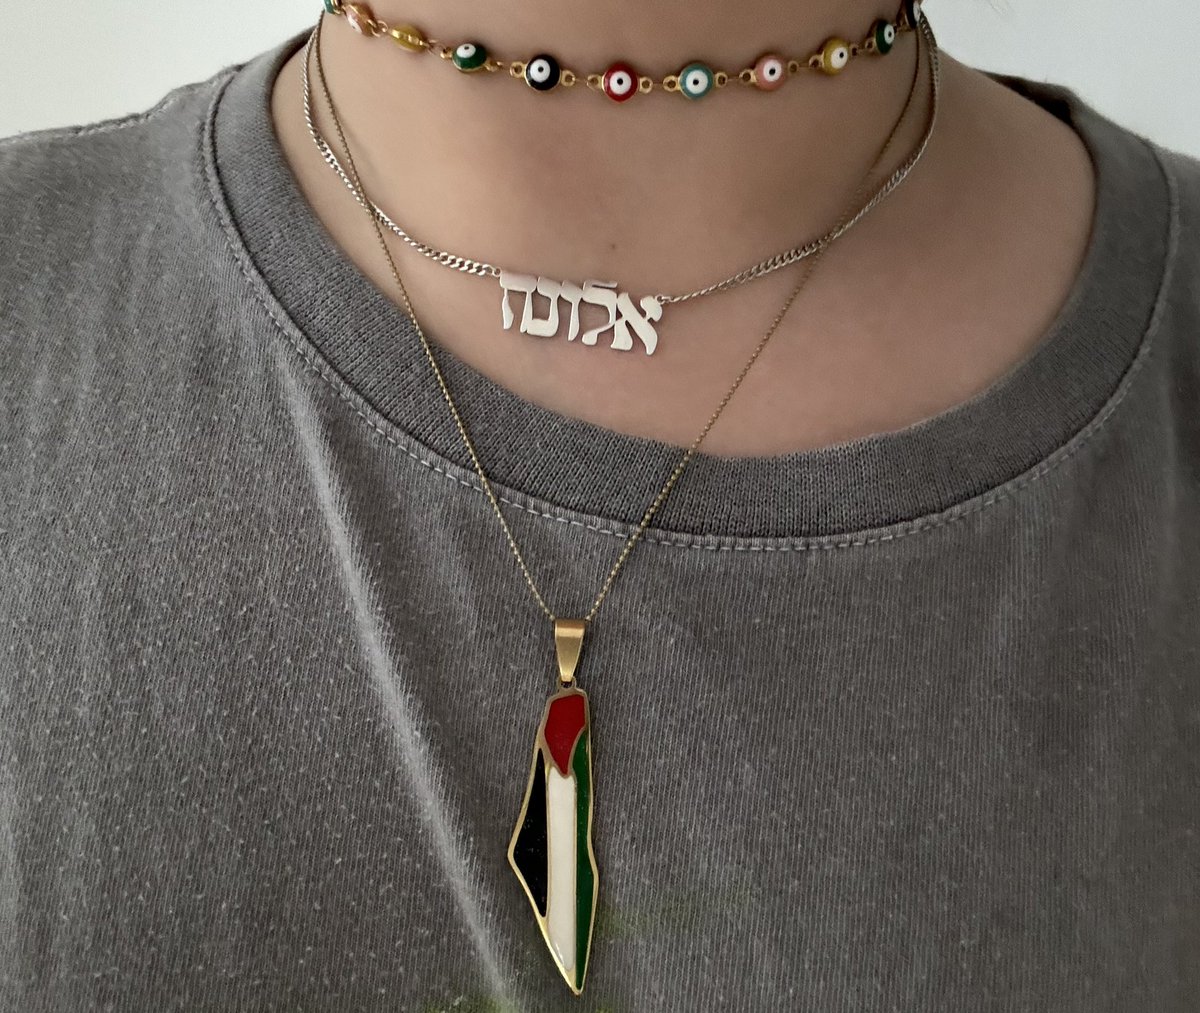 the most uncomfortable i've been as a jewish person in public since october 7th has been as a result of zionists. tell me why i tried to order a sandwich today and a man asked if i was jewish and then felt the need to ask me why i had the palestine flag on my necklace of 'israel'